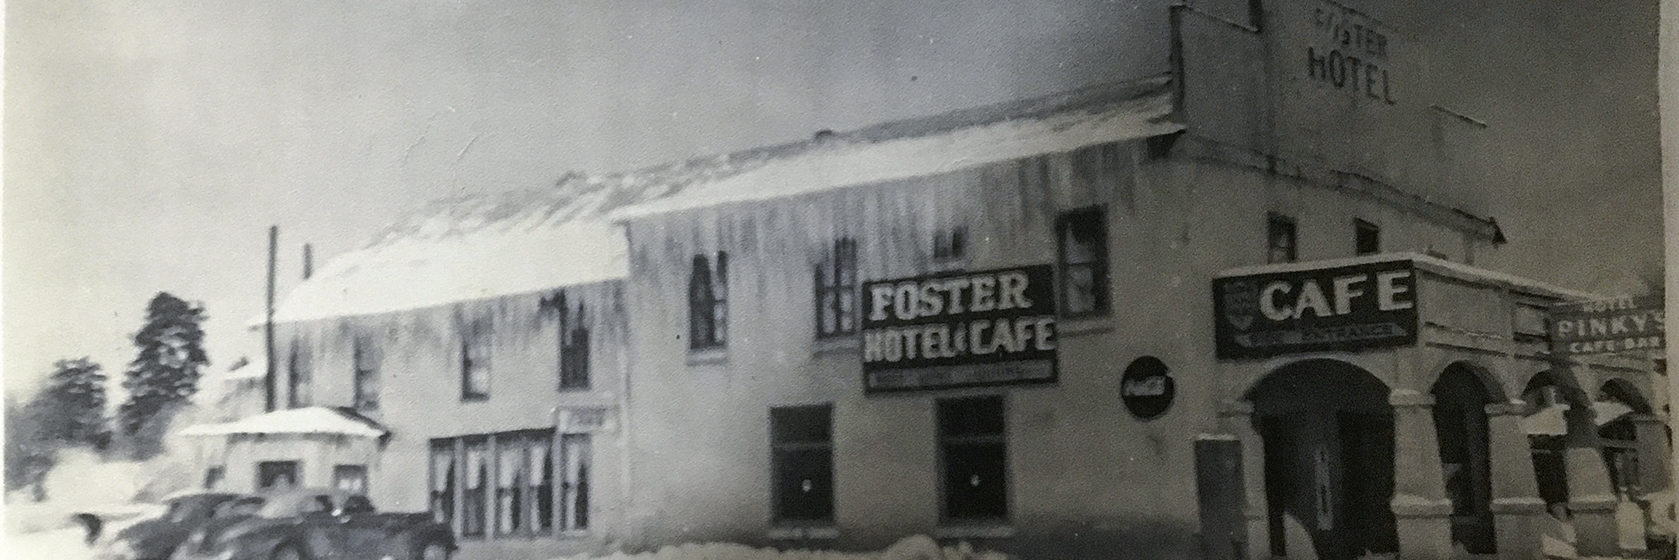 Foster's 1881